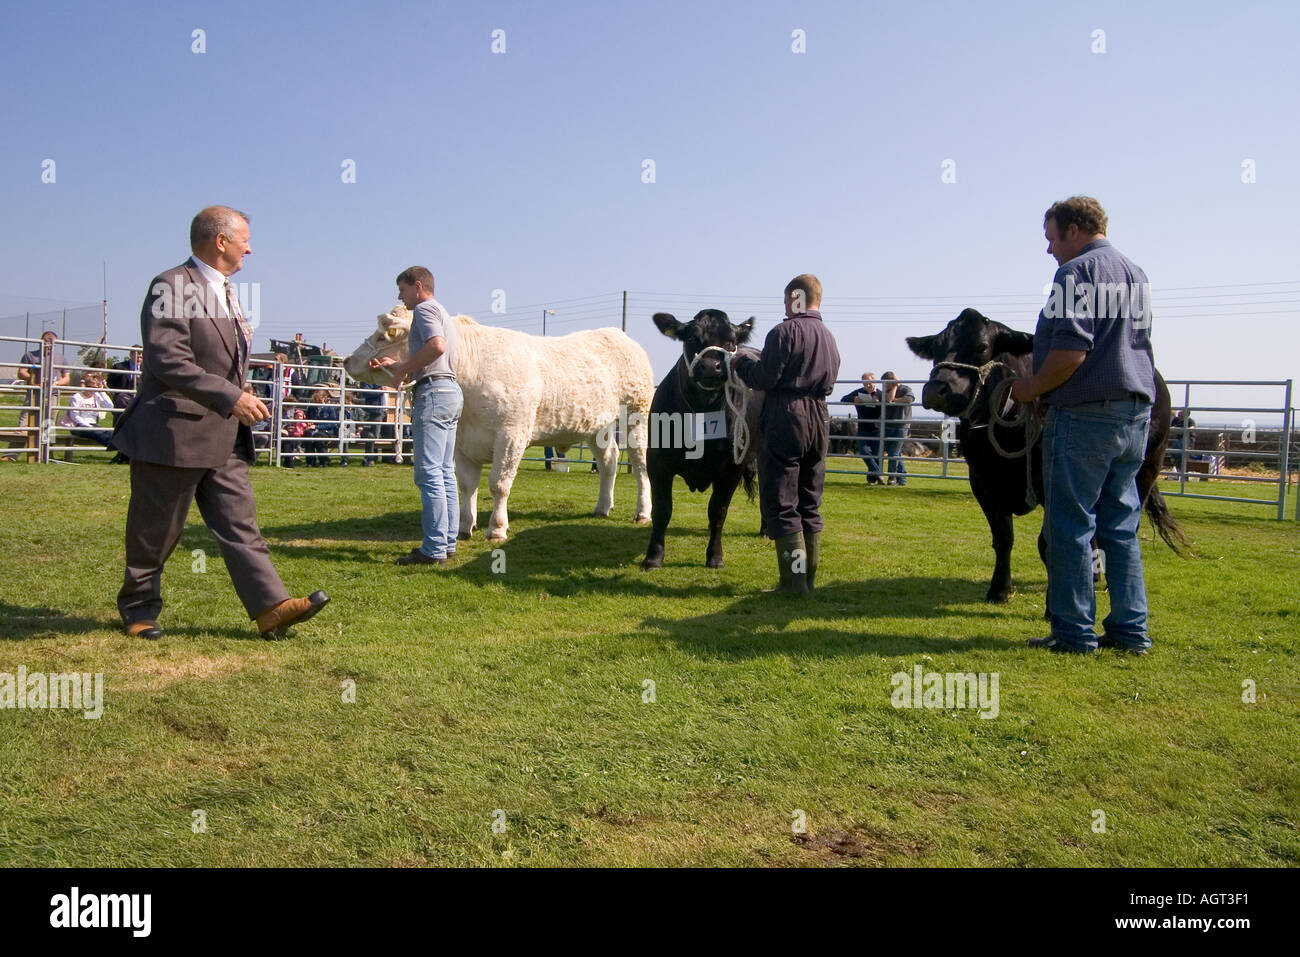 dh Annual Cattle Show SHAPINSAY ORKNEY Beef cows Charolais and cross bred Heifers in agricultural show ring Stock Photo